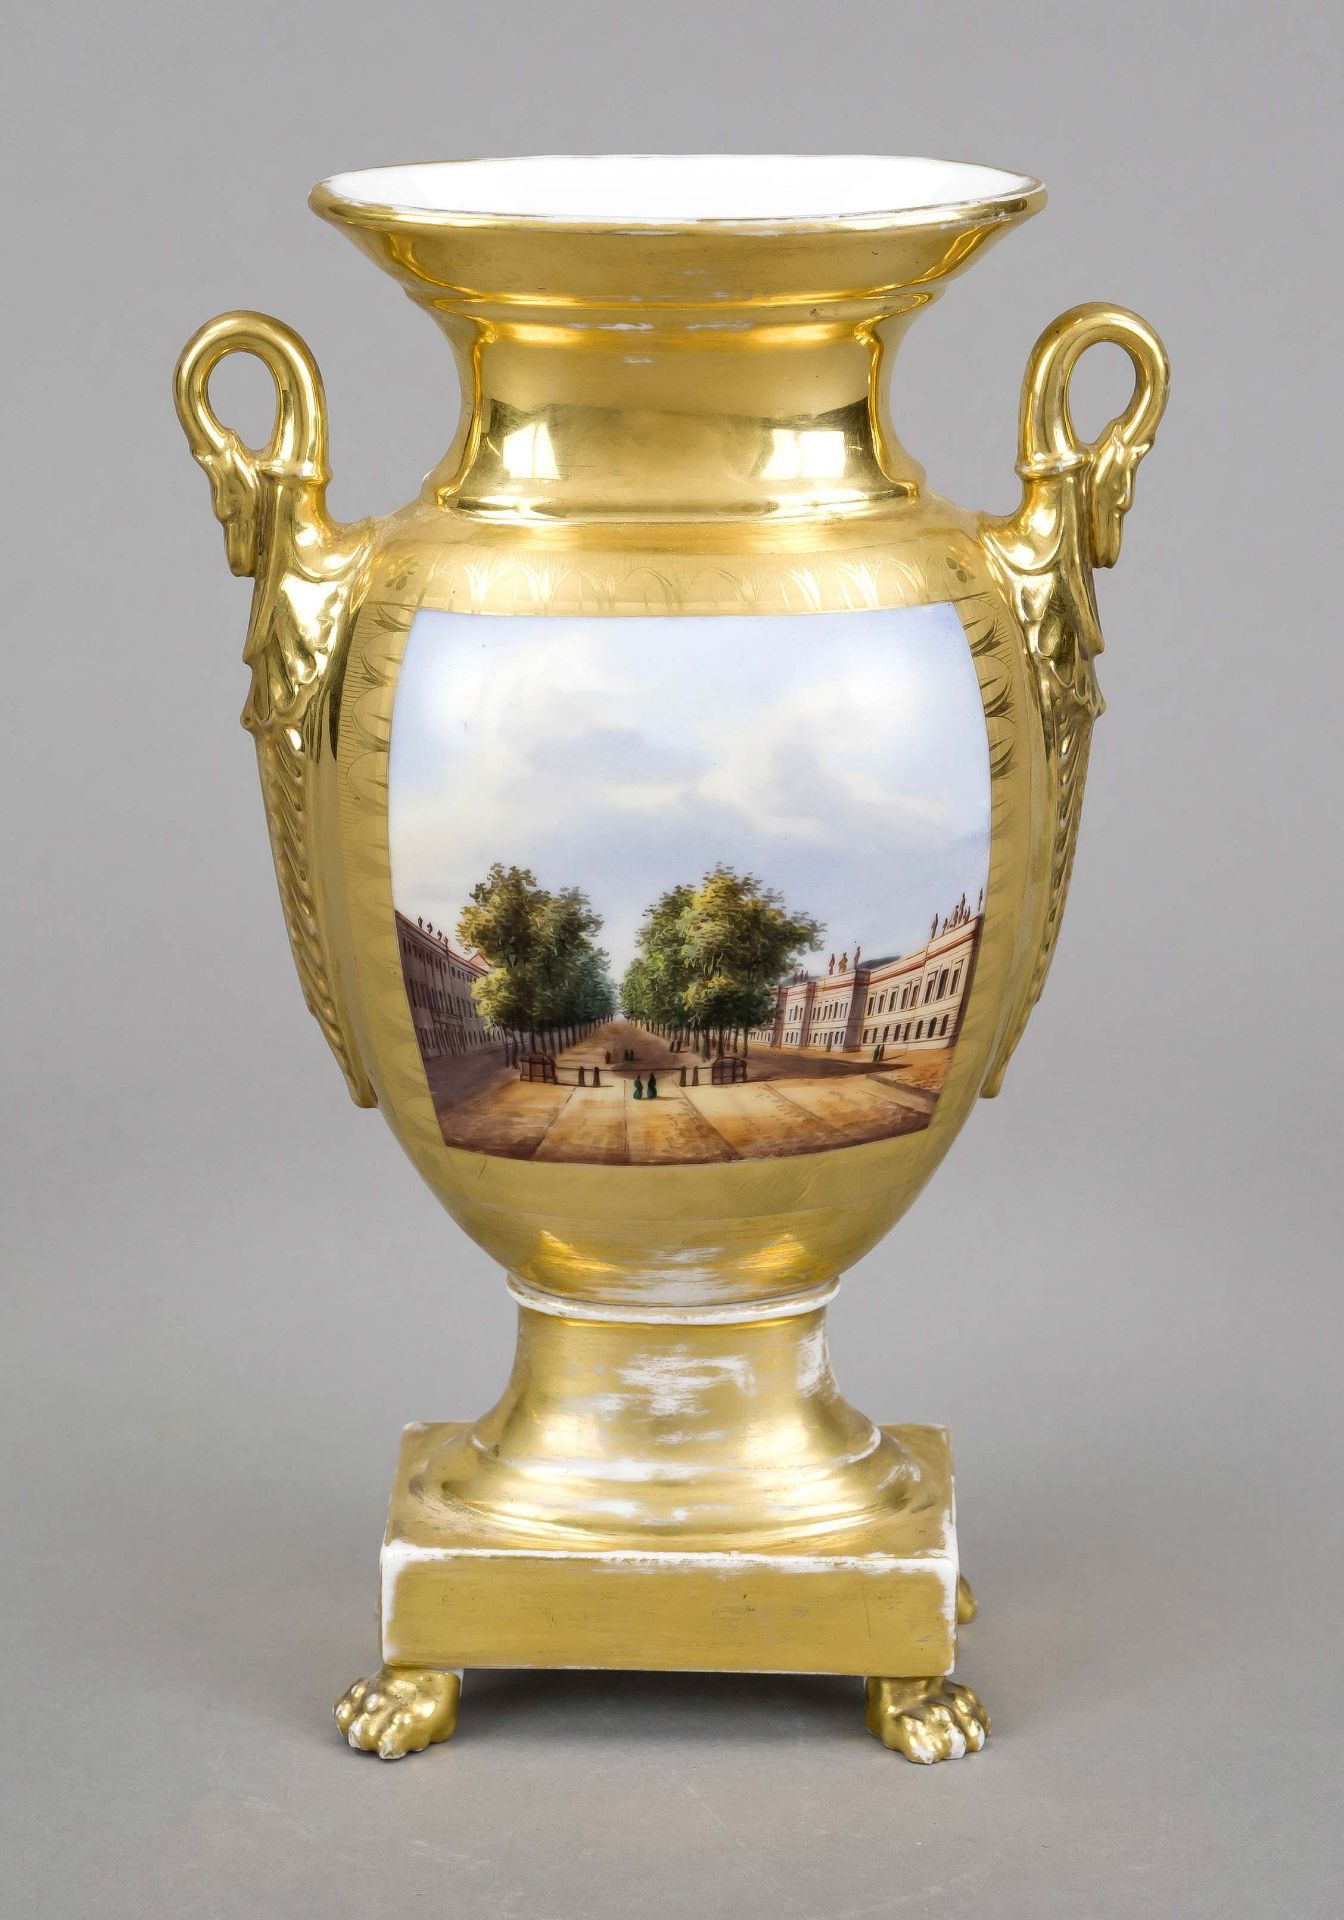 Vase, ''View of the Academy Building'', 1st half 19th century, w. France, flattened body with swan